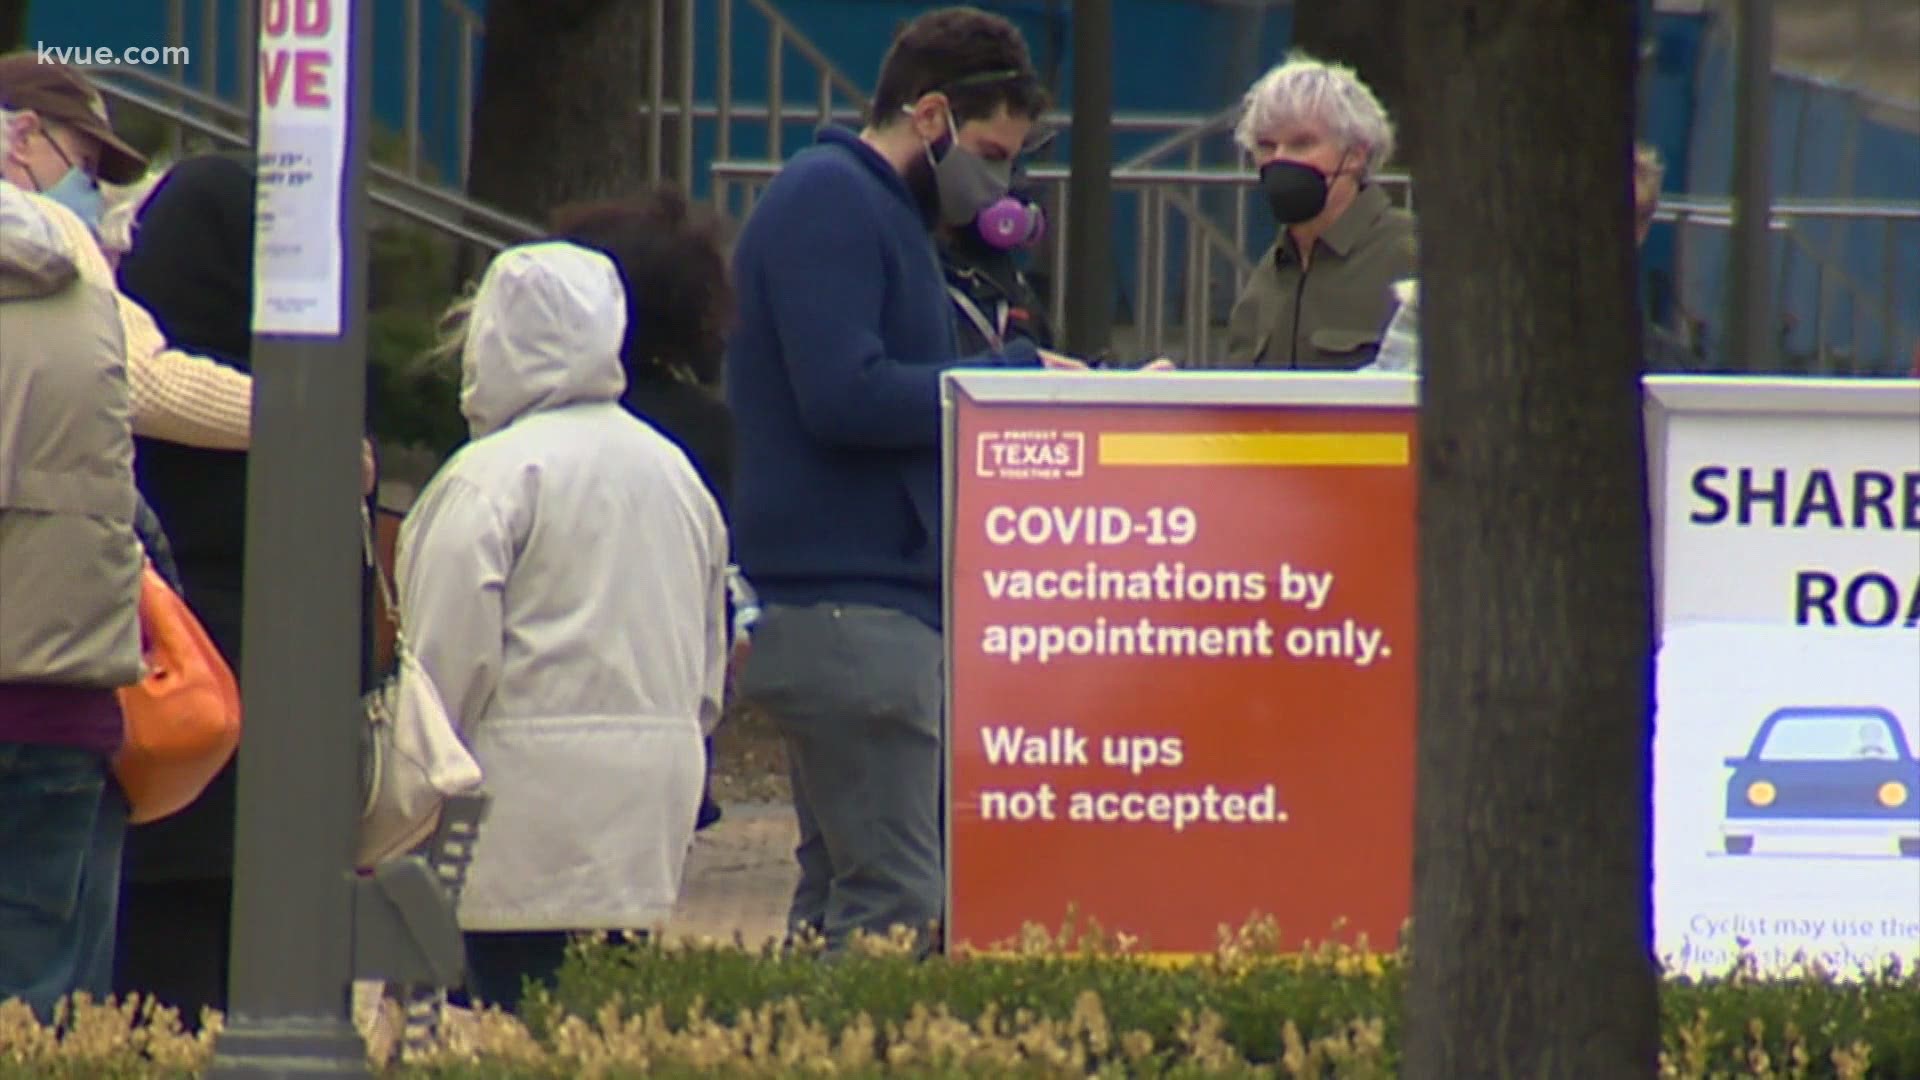 Misinformation about COVID-19 vaccine appointments reportedly led to long lines at UT Austin.